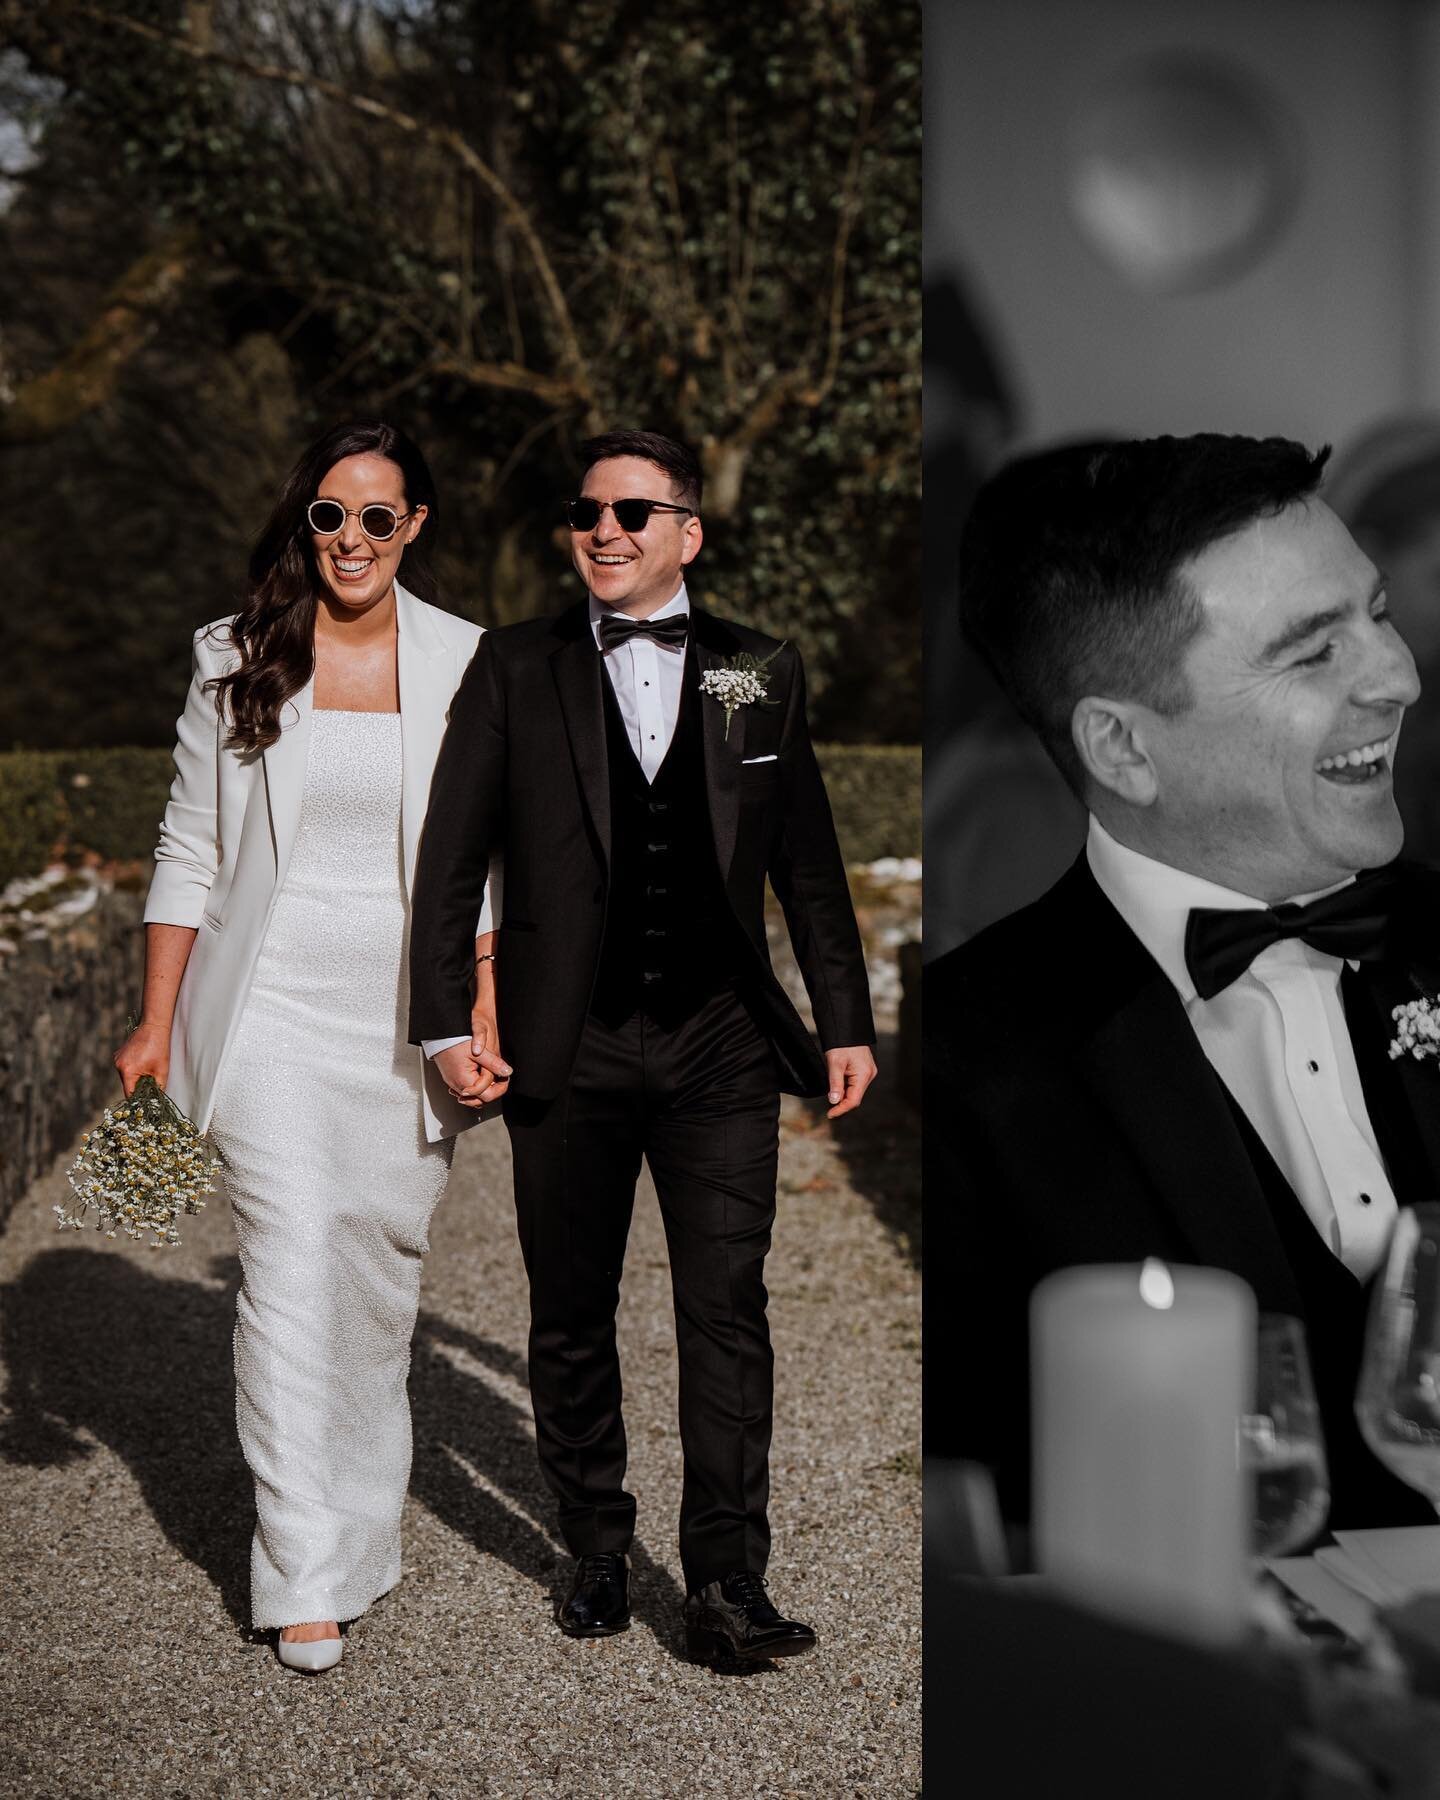 The lovely Maeve &amp; Martin got married in the beautiful surroundings of @virginia_park_lodge this was such a special day to be part of - from the best man singing during the ceremony to the brilliant speeches in the evening, that included a poem w